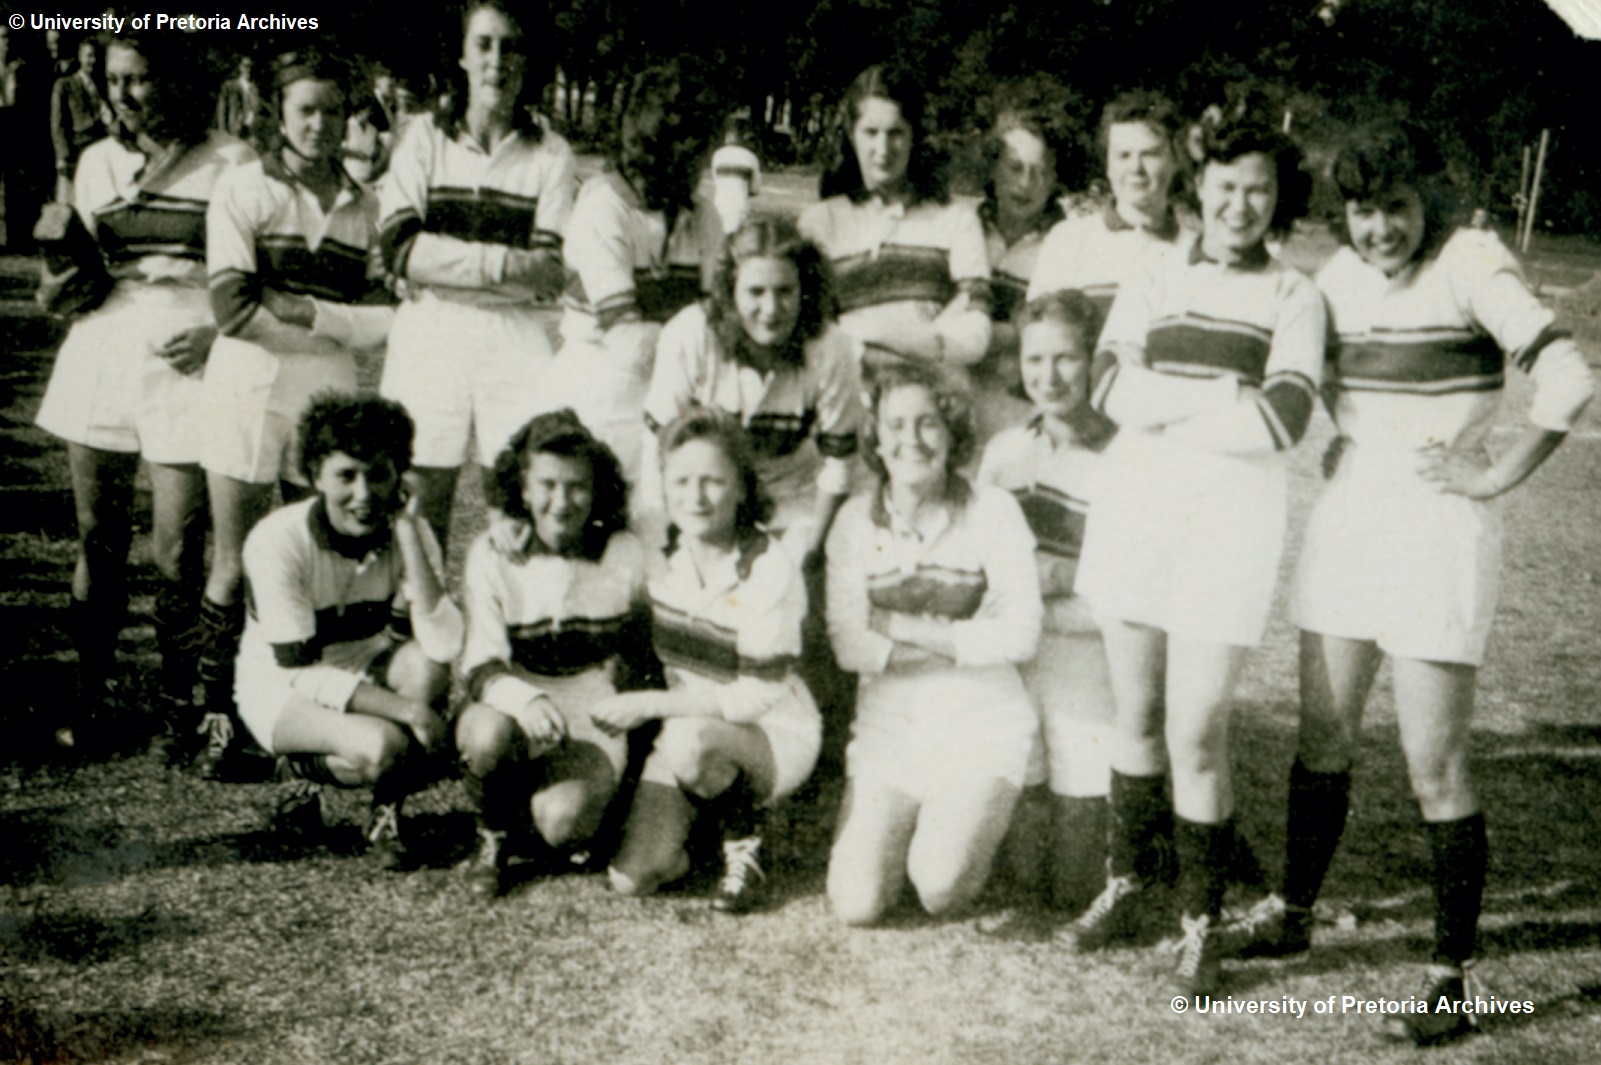 Early Tukkie women's rugby team